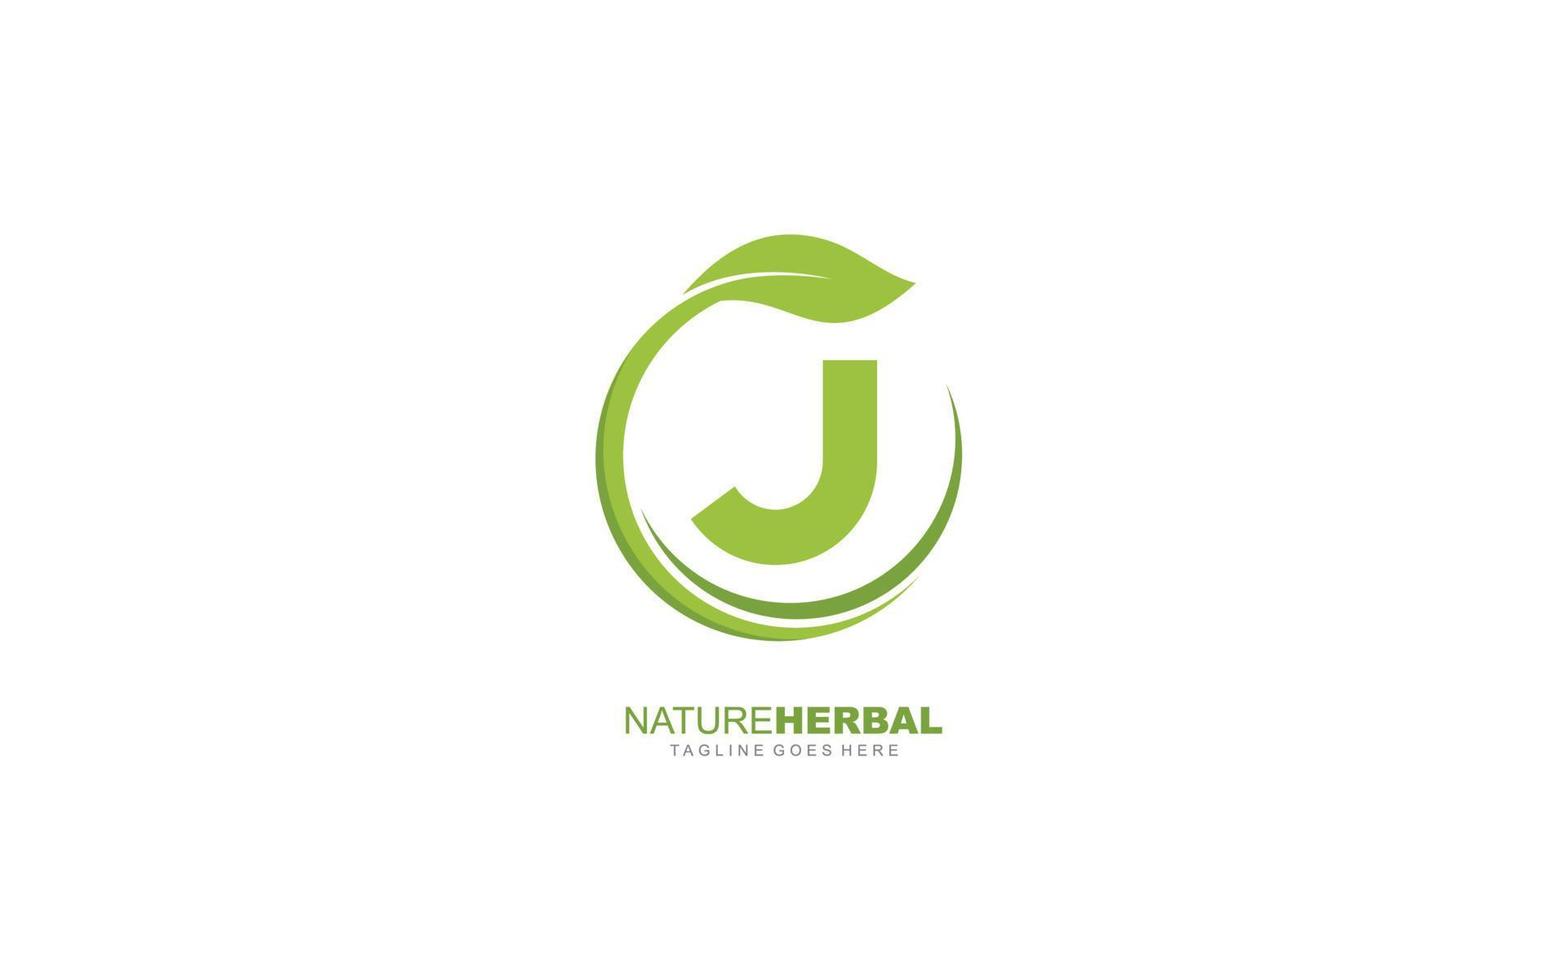 J logo leaf for identity. nature template vector illustration for your brand.